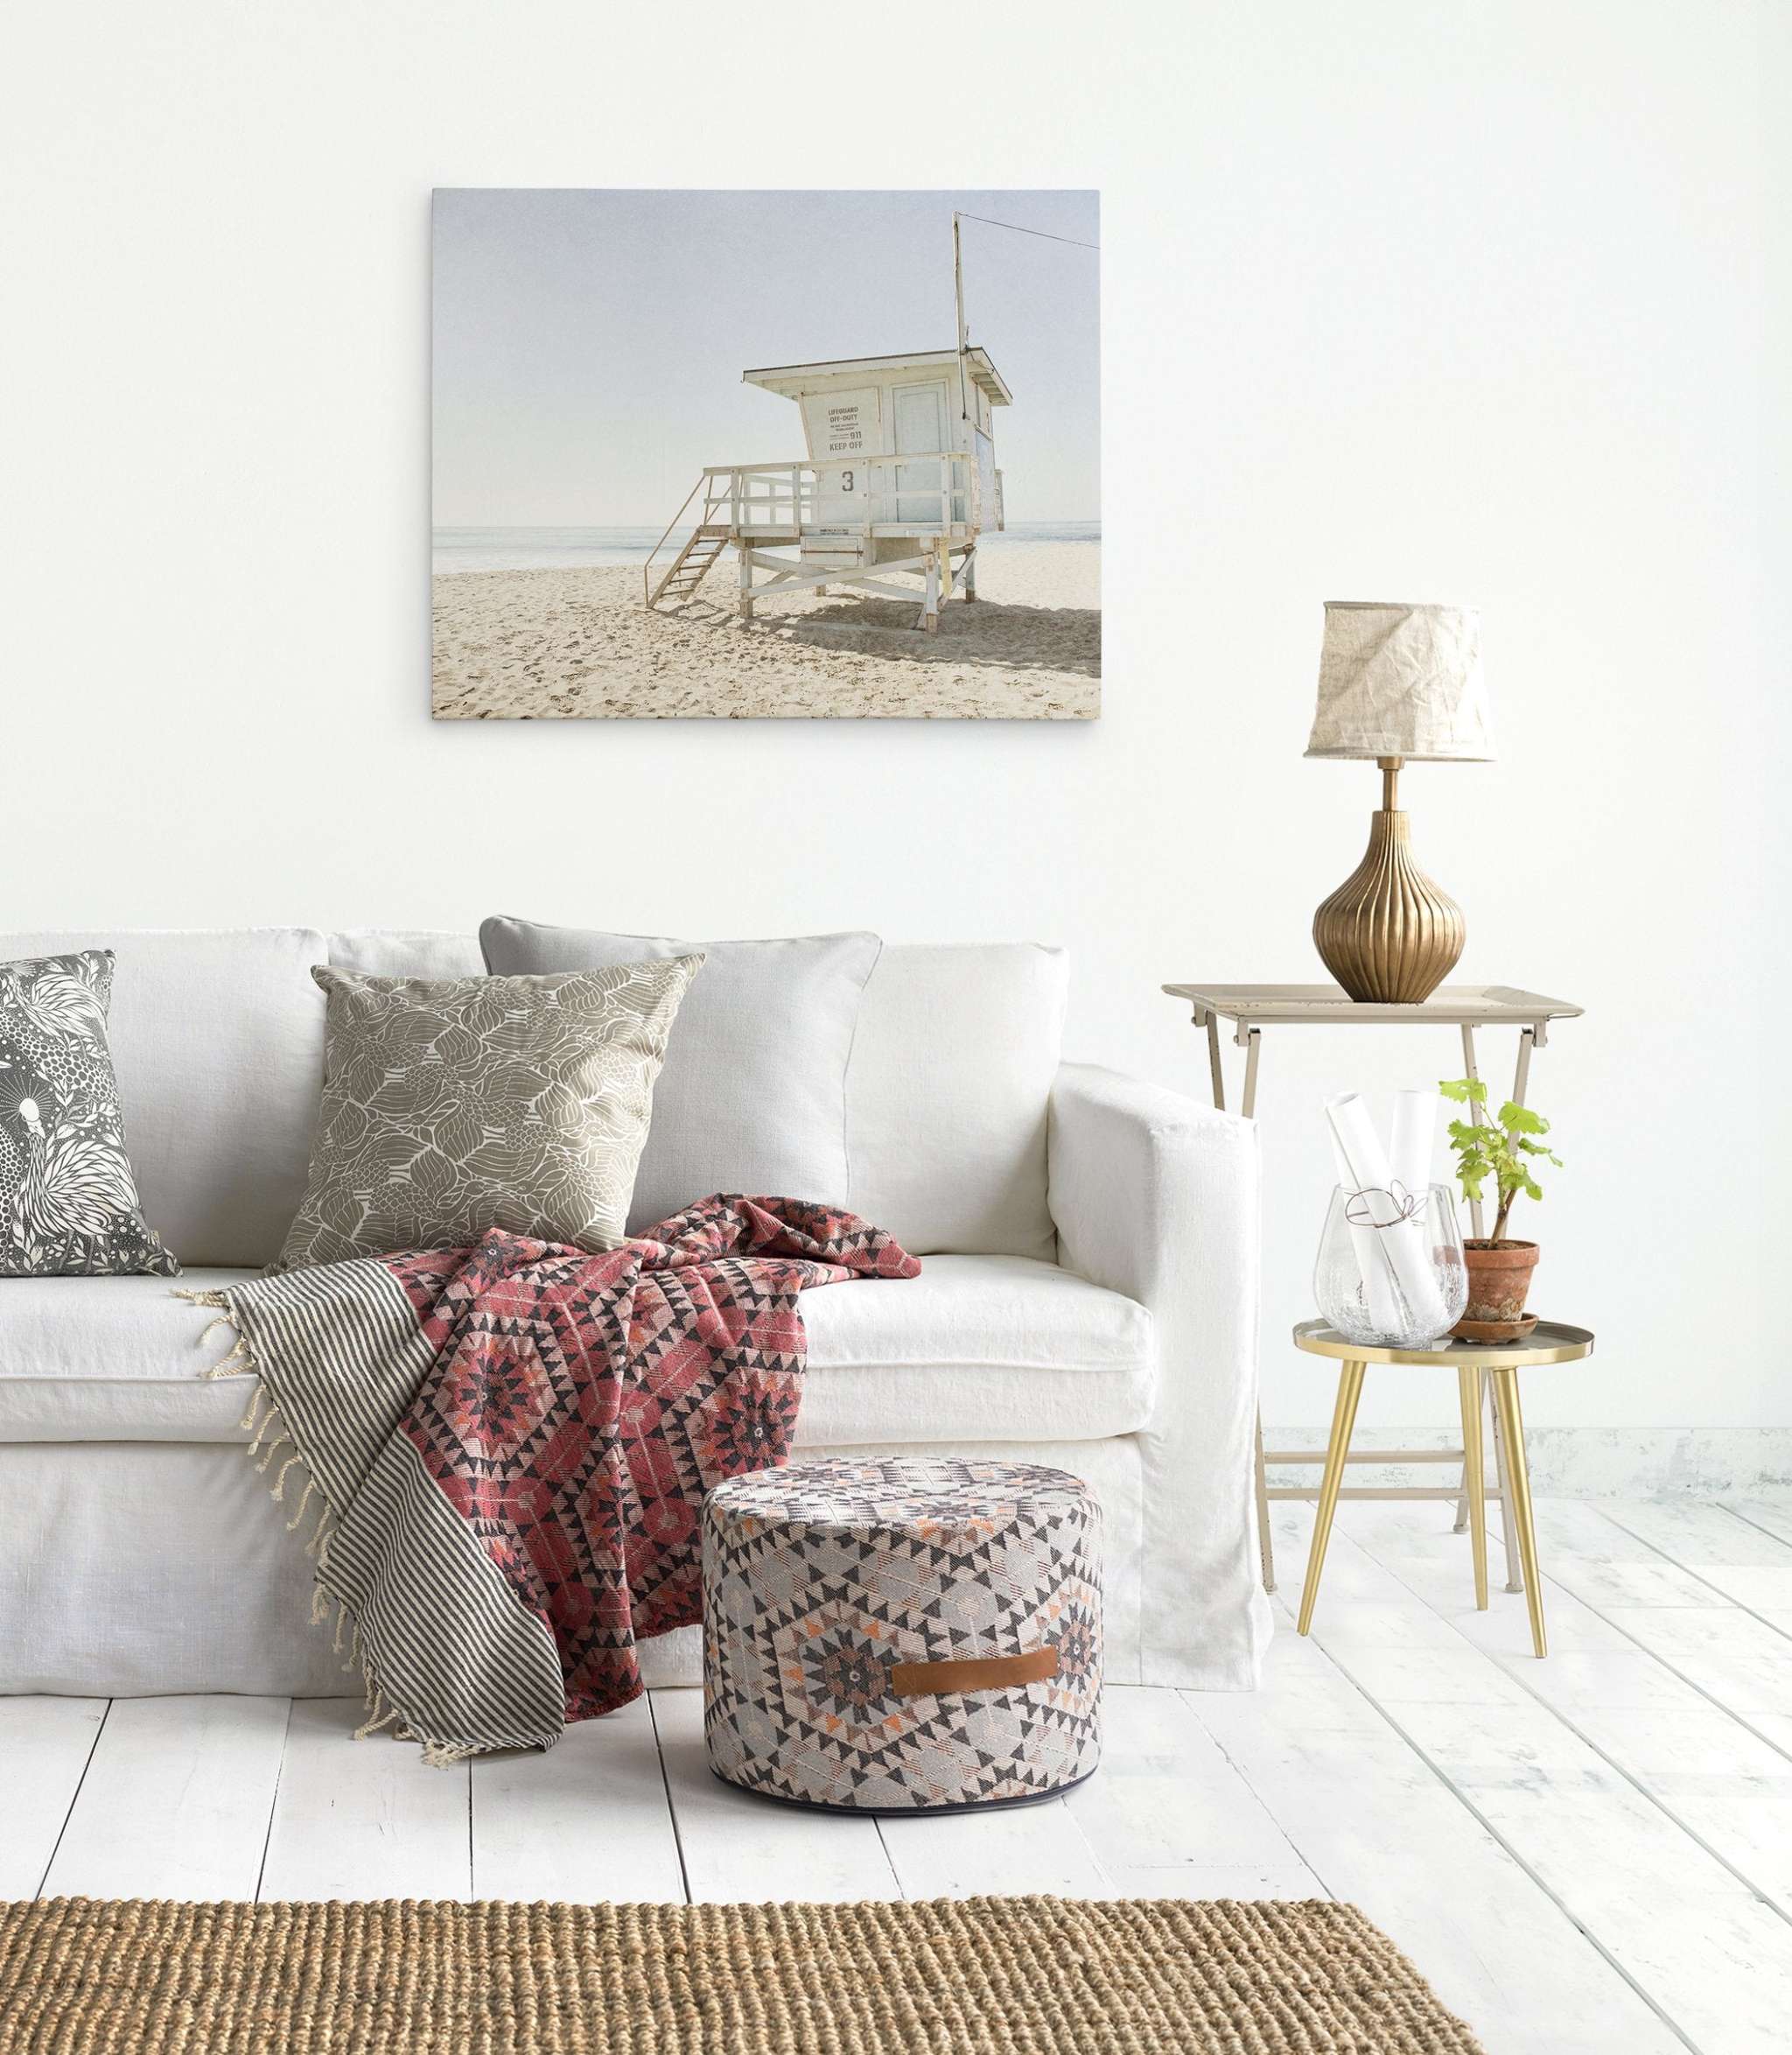 A cozy living room features a white sofa adorned with patterned pillows and a red throw blanket. In front of the sofa is a patterned ottoman. A side table holding a lamp, small plant, and glass vase stands beside the sofa. A California Summer Beach Canvas Art, 'Malibu Lifeguard Tower' by Offley Green showcases Malibu lifeguard towers under coastal sunshine California hanging on the wall.